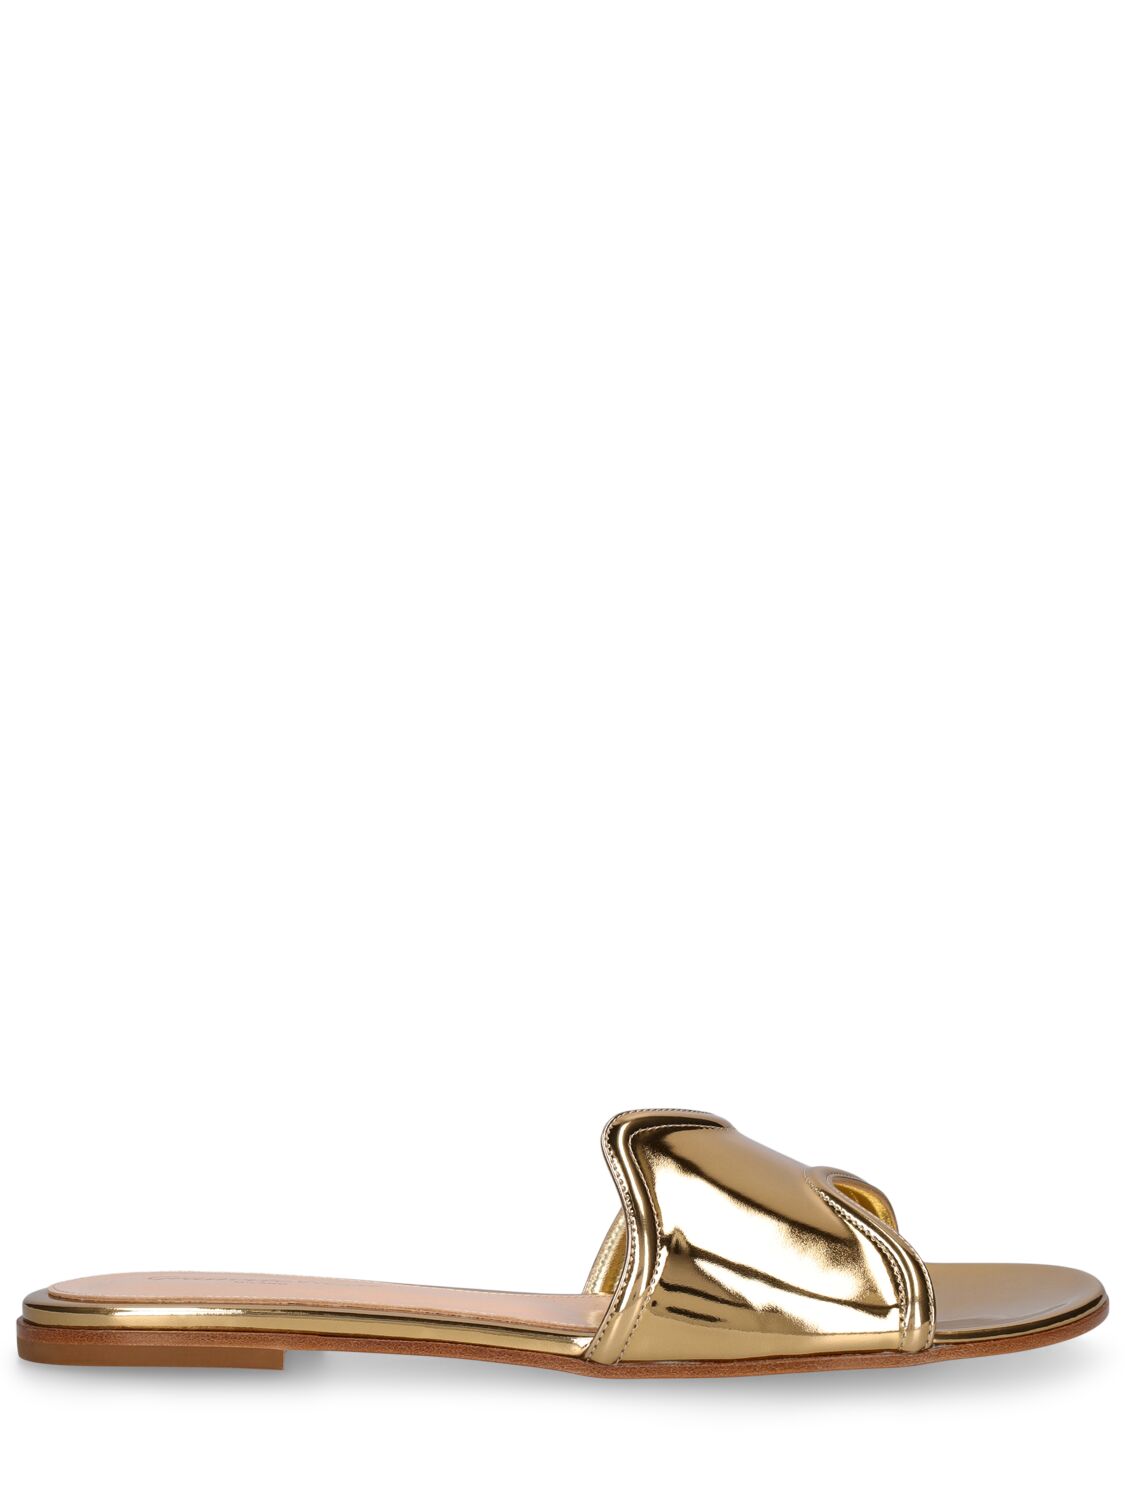 Gianvito Rossi Metallic Leather Flat Sandals In Gold